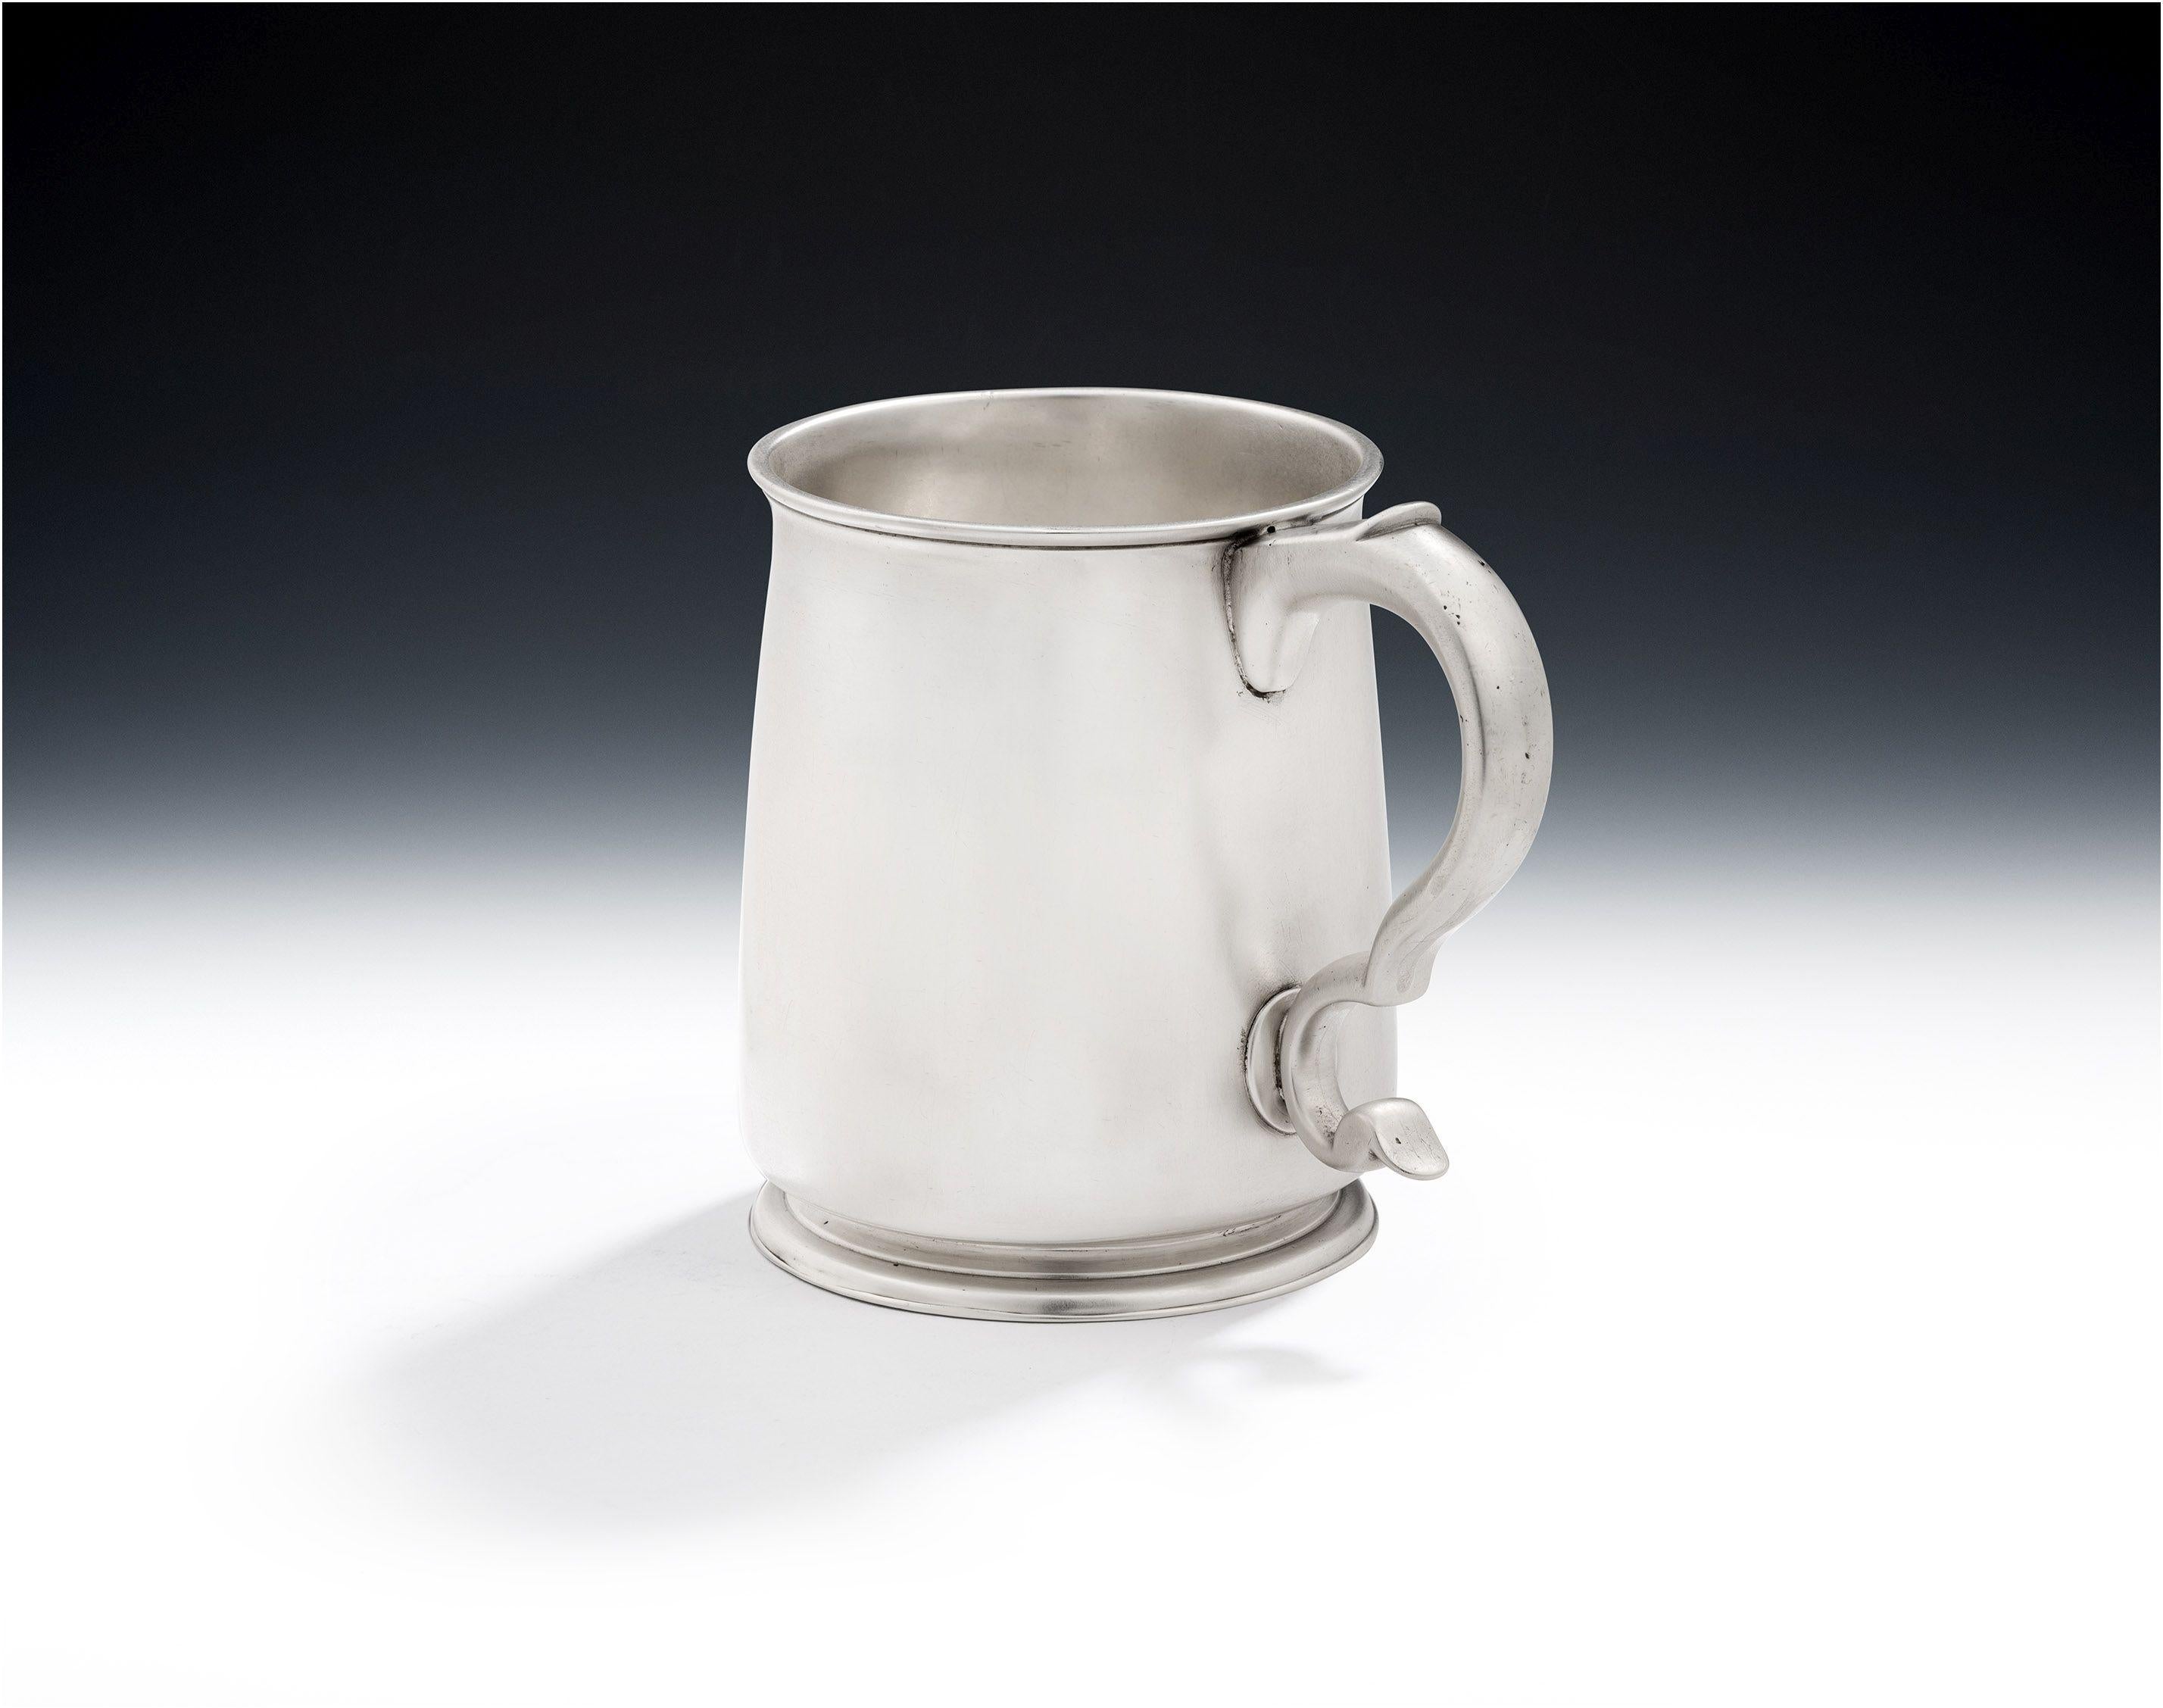 A Very Fine George I Pint Mug Made in London in 1721 by Thomas Folkingham.

The Mug has slightly tapering sides, a tucked in base, and everted rim, which was the style of the 1720's and 1730's.  This example has a very attractive scroll handle and